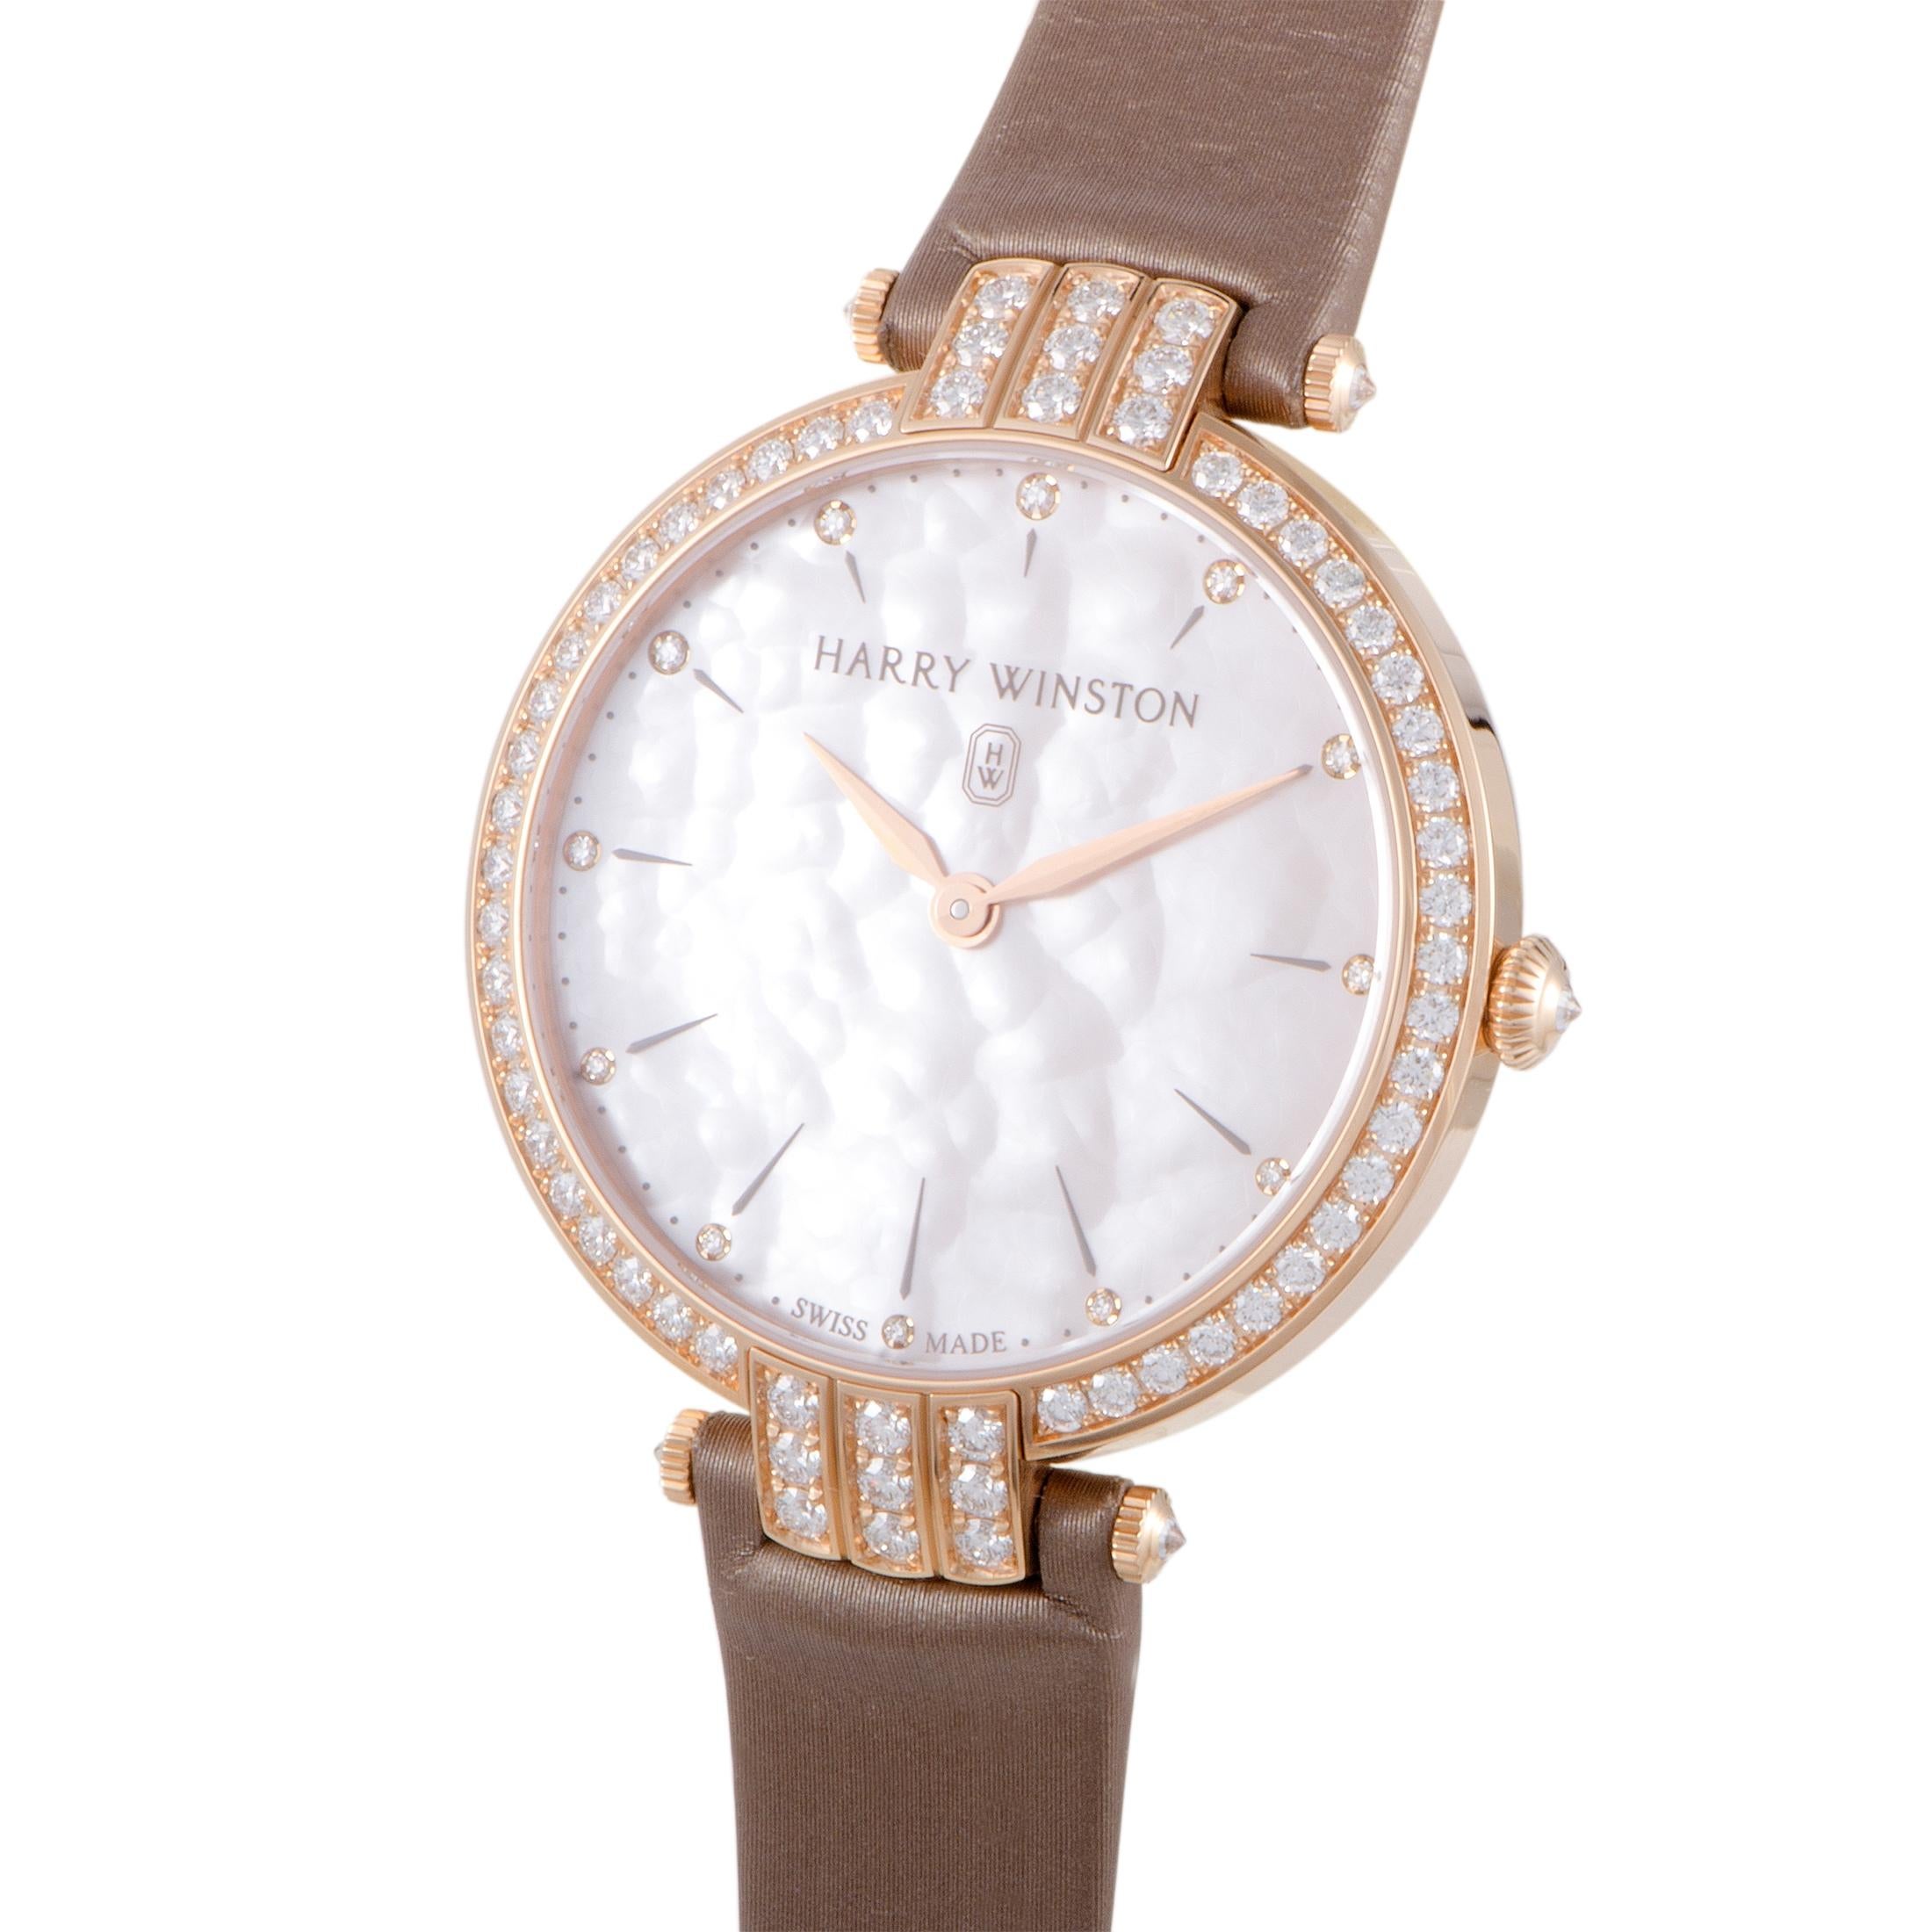 Delightful femininity, graceful elegance, and prestigious resplendence meet in this enchanting timepiece from Harry Winston which entices with its wonderful harmony of colors, fabulous radiance of gold, and tantalizing luster of diamonds. Driven by